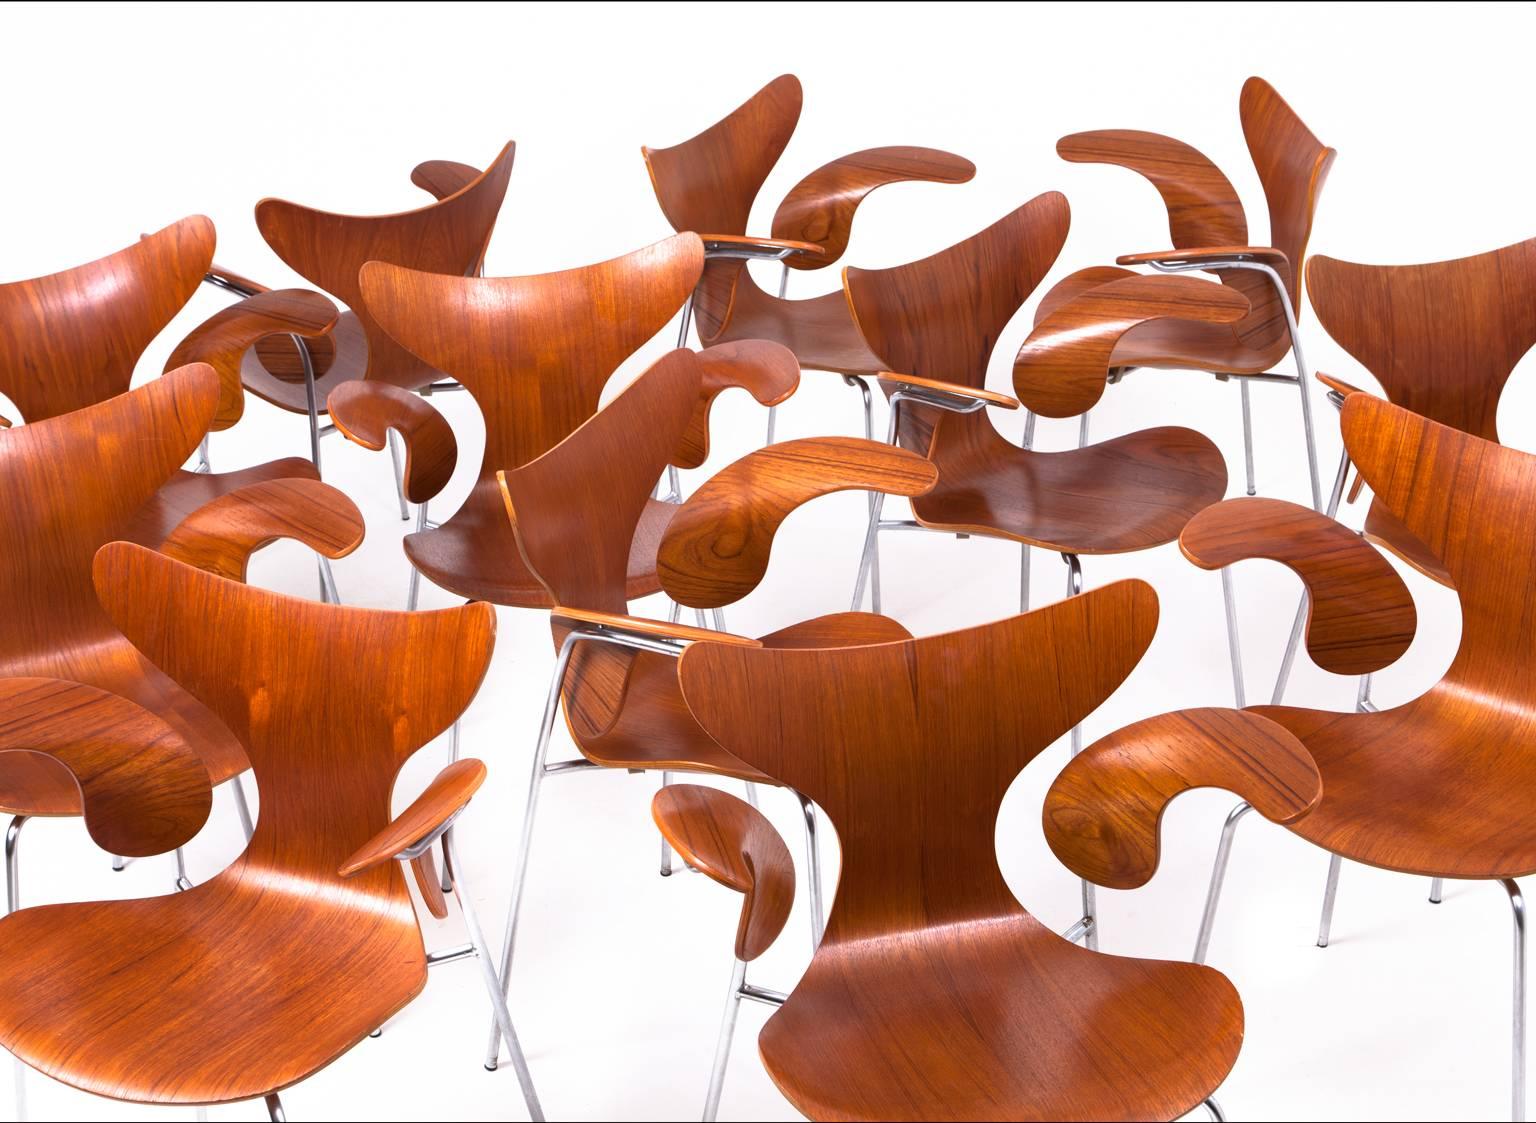 Arne Jacobsen Set of 12 Seagull Chairs in Teak For Sale 1